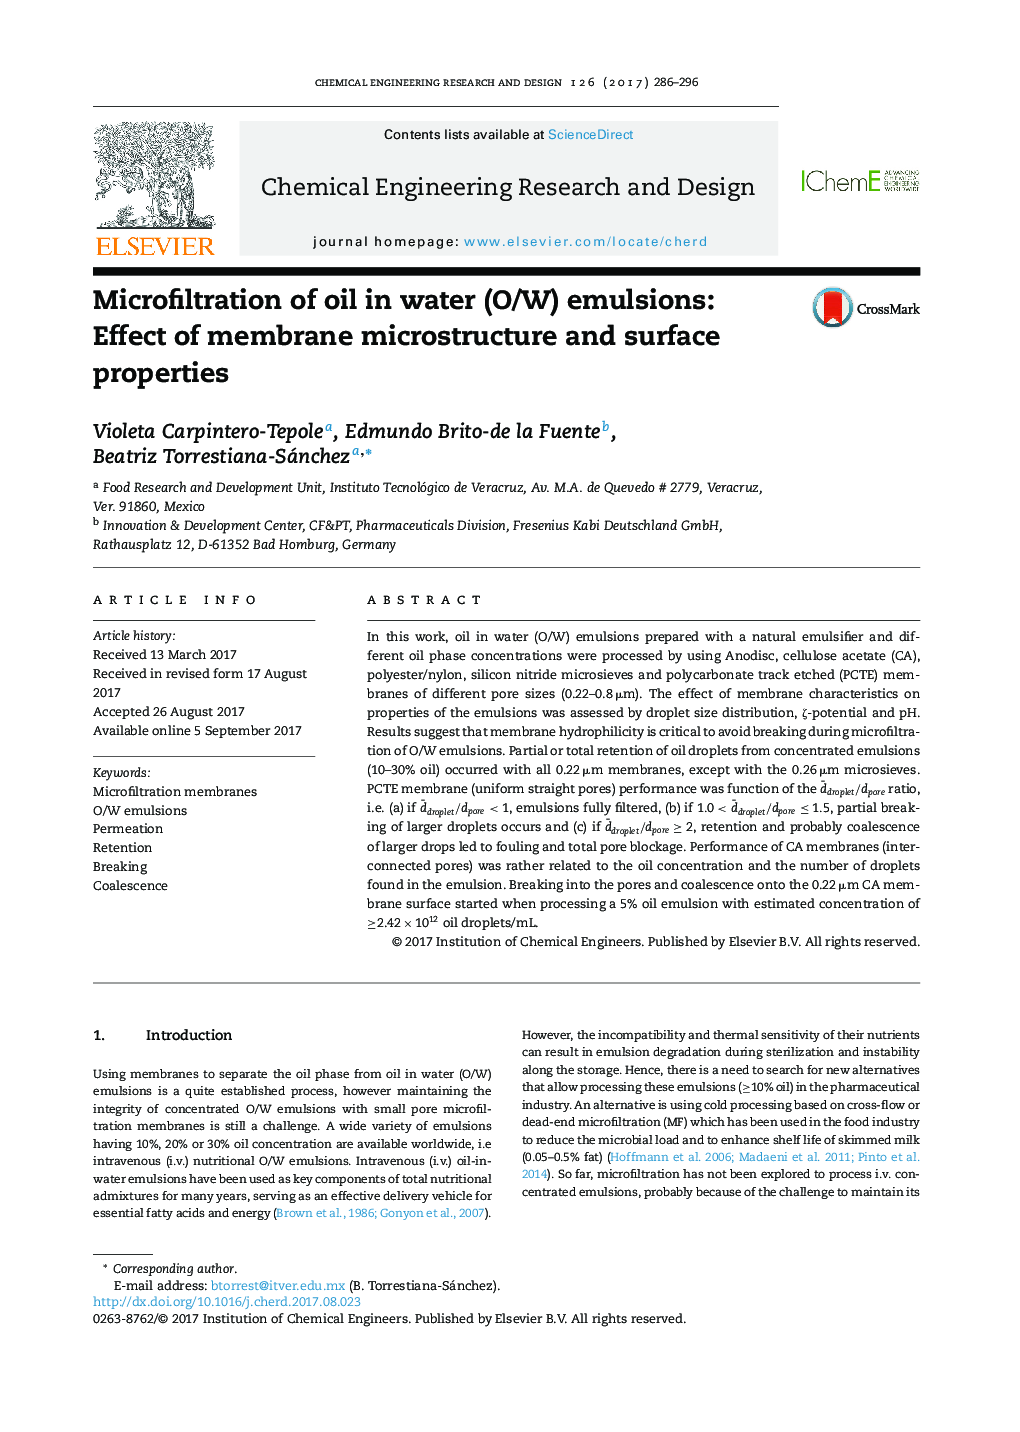 Microfiltration of oil in water (O/W) emulsions: Effect of membrane microstructure and surface properties